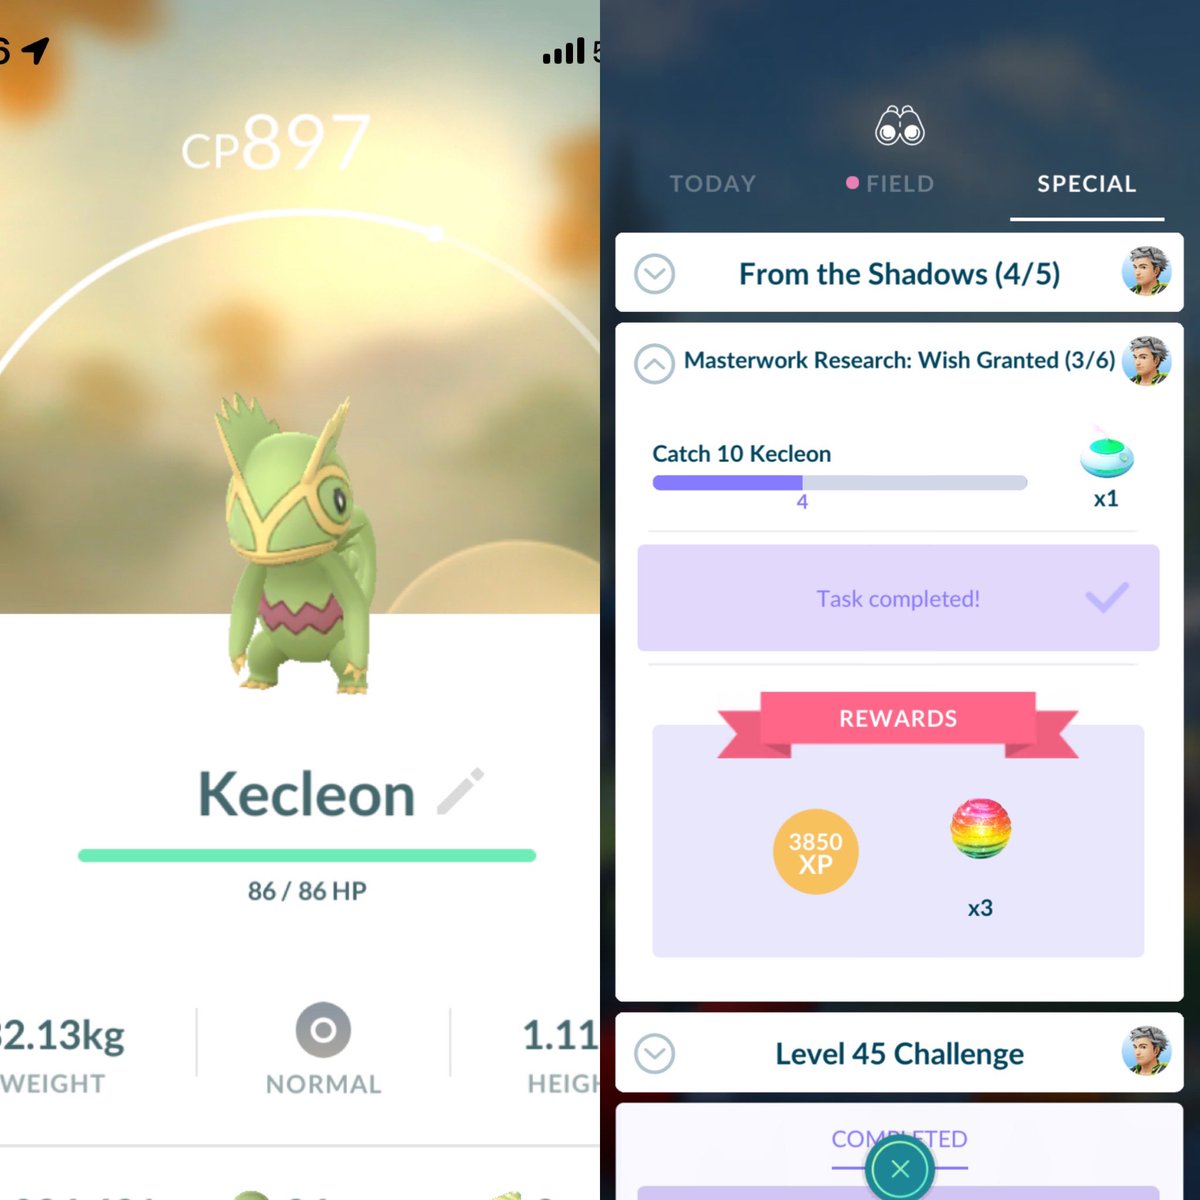 YESSS the one shiny I really REALLY wanted from this event and I got it during the spotlight hour 😍🧡🩵
also got another kecleon 🥳